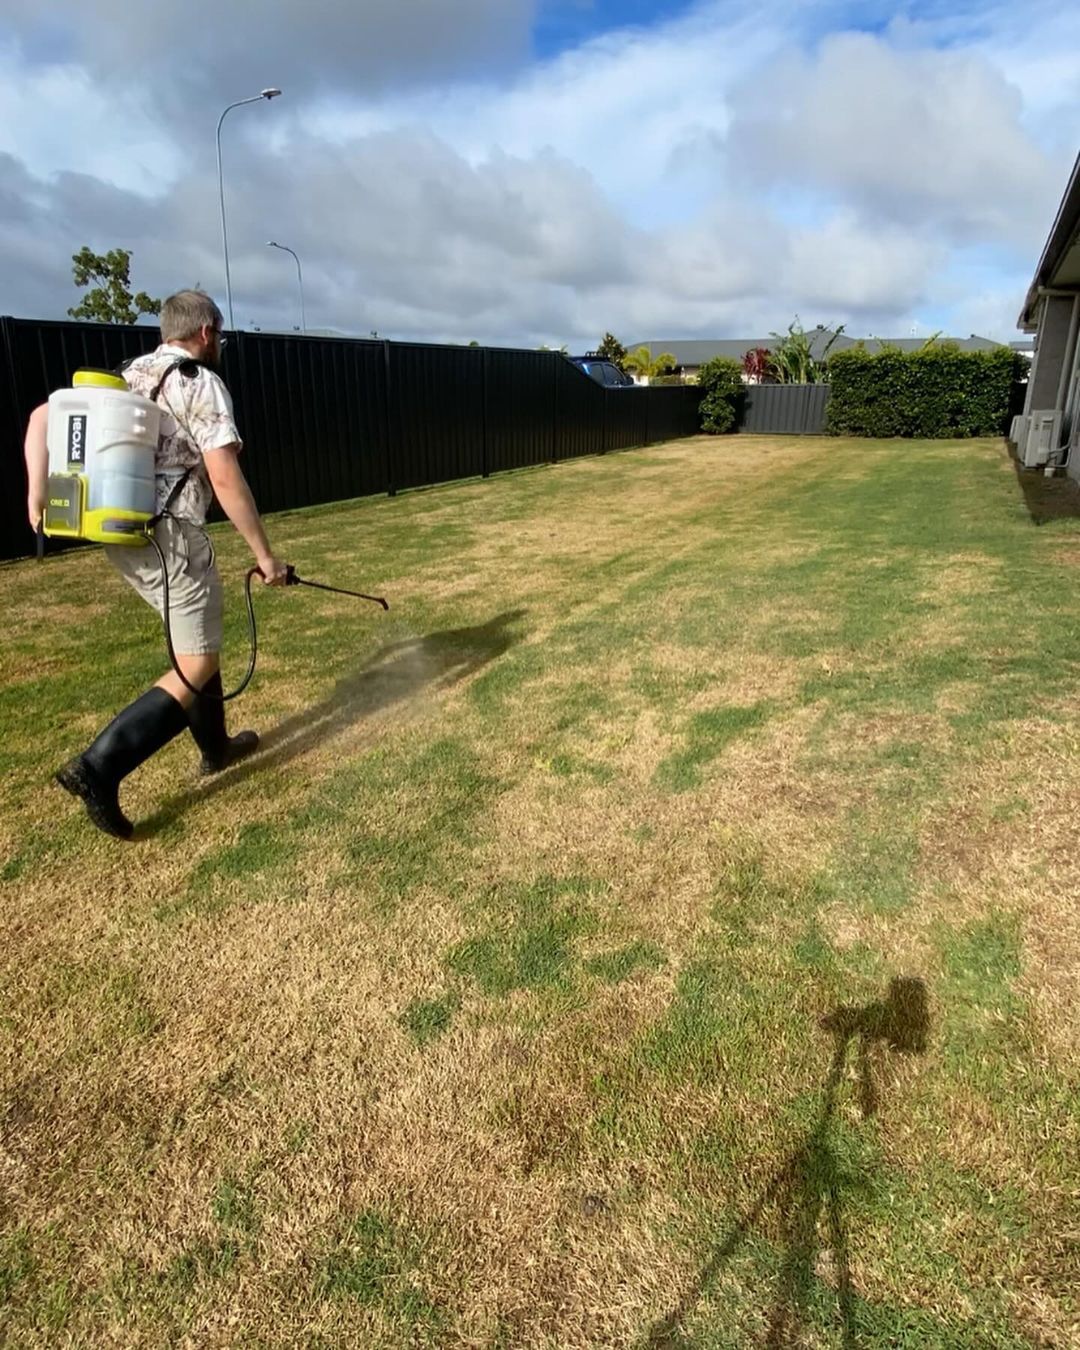 Give your lawn some TLC like @fraser_coast_lawnie with the RYOBI 18V ONE+ Seed & Fertiliser Spreader and the RYOBI 18V ONE+ 15L Backpack Chemical Sprayer.

Save these tools to your wish list today!

#RYOBIau #batterypowered #RYOBImade #RYOBIpowertools #LawnCare #Gardening